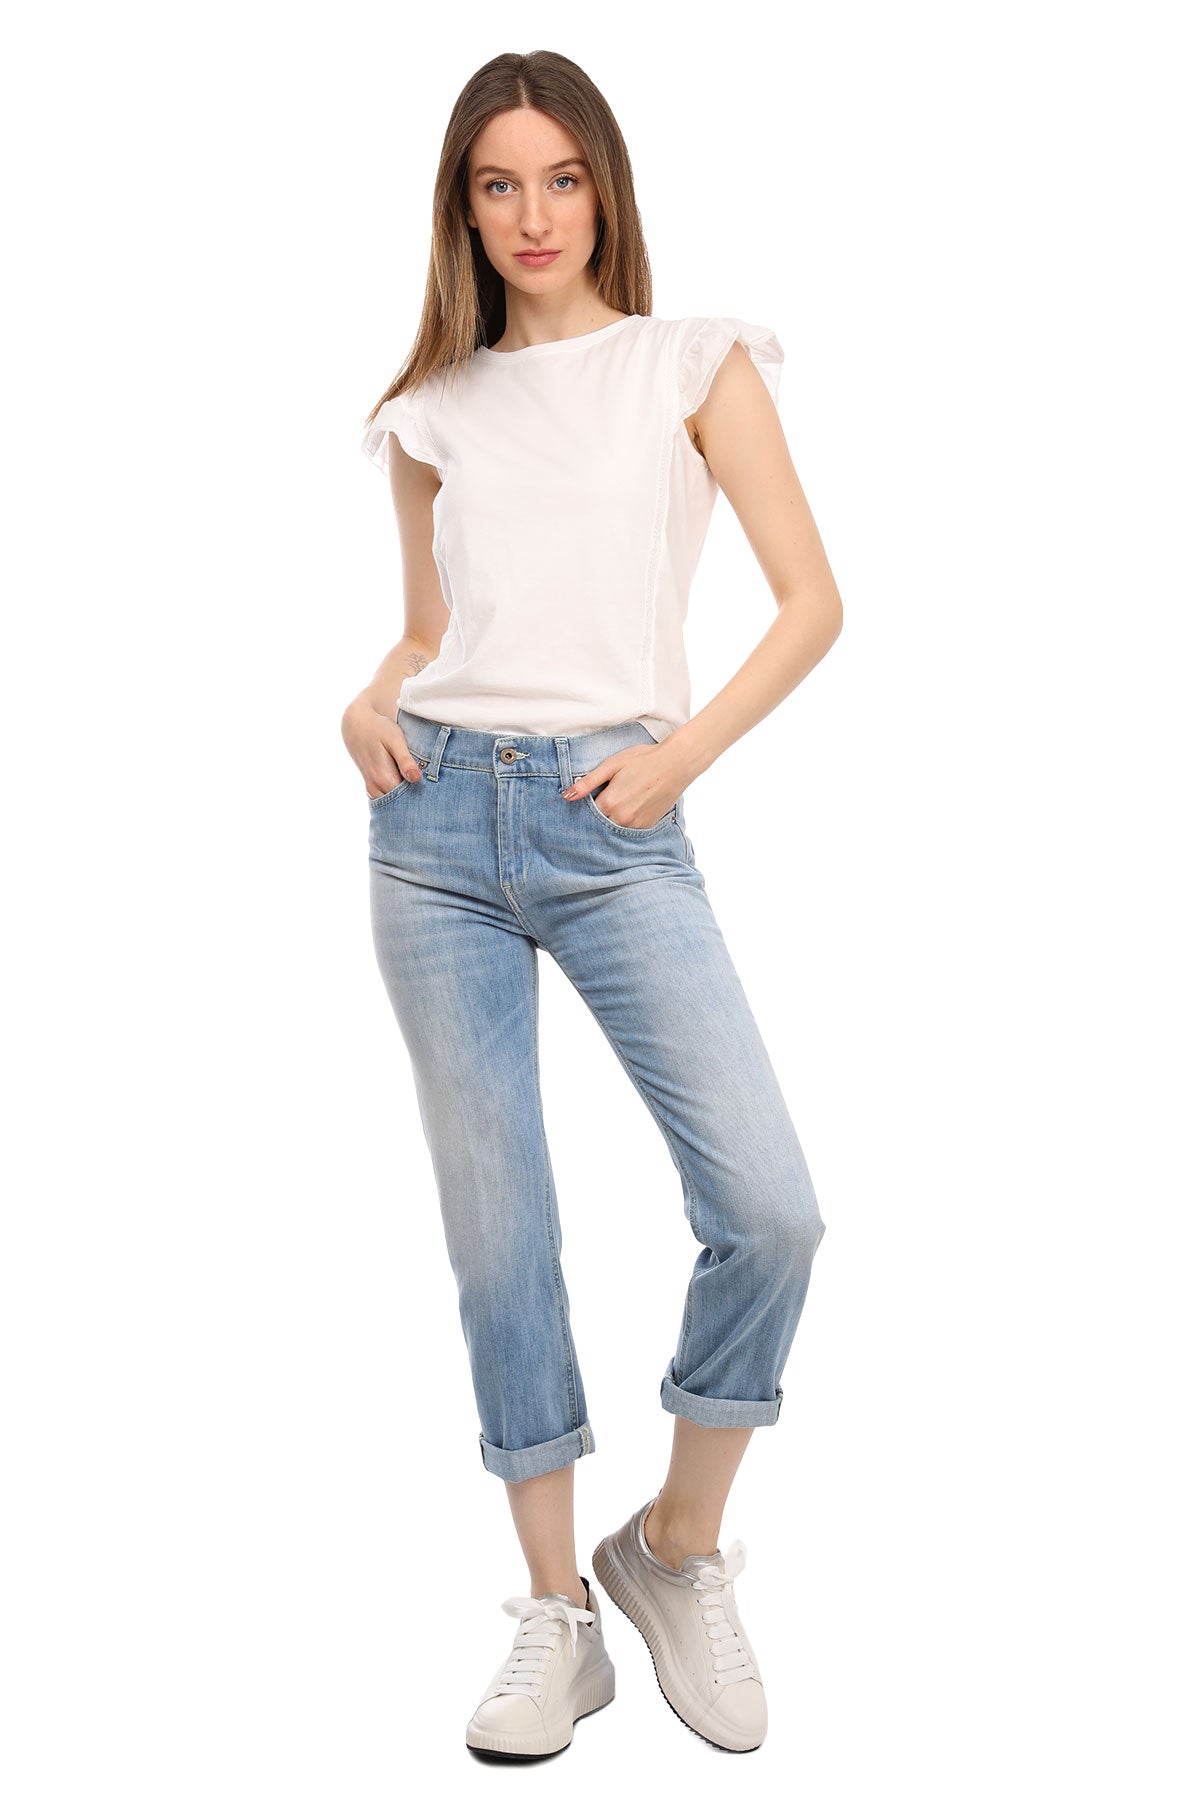 Dondup Paige Loose Fit Jeans-Libas Trendy Fashion Store